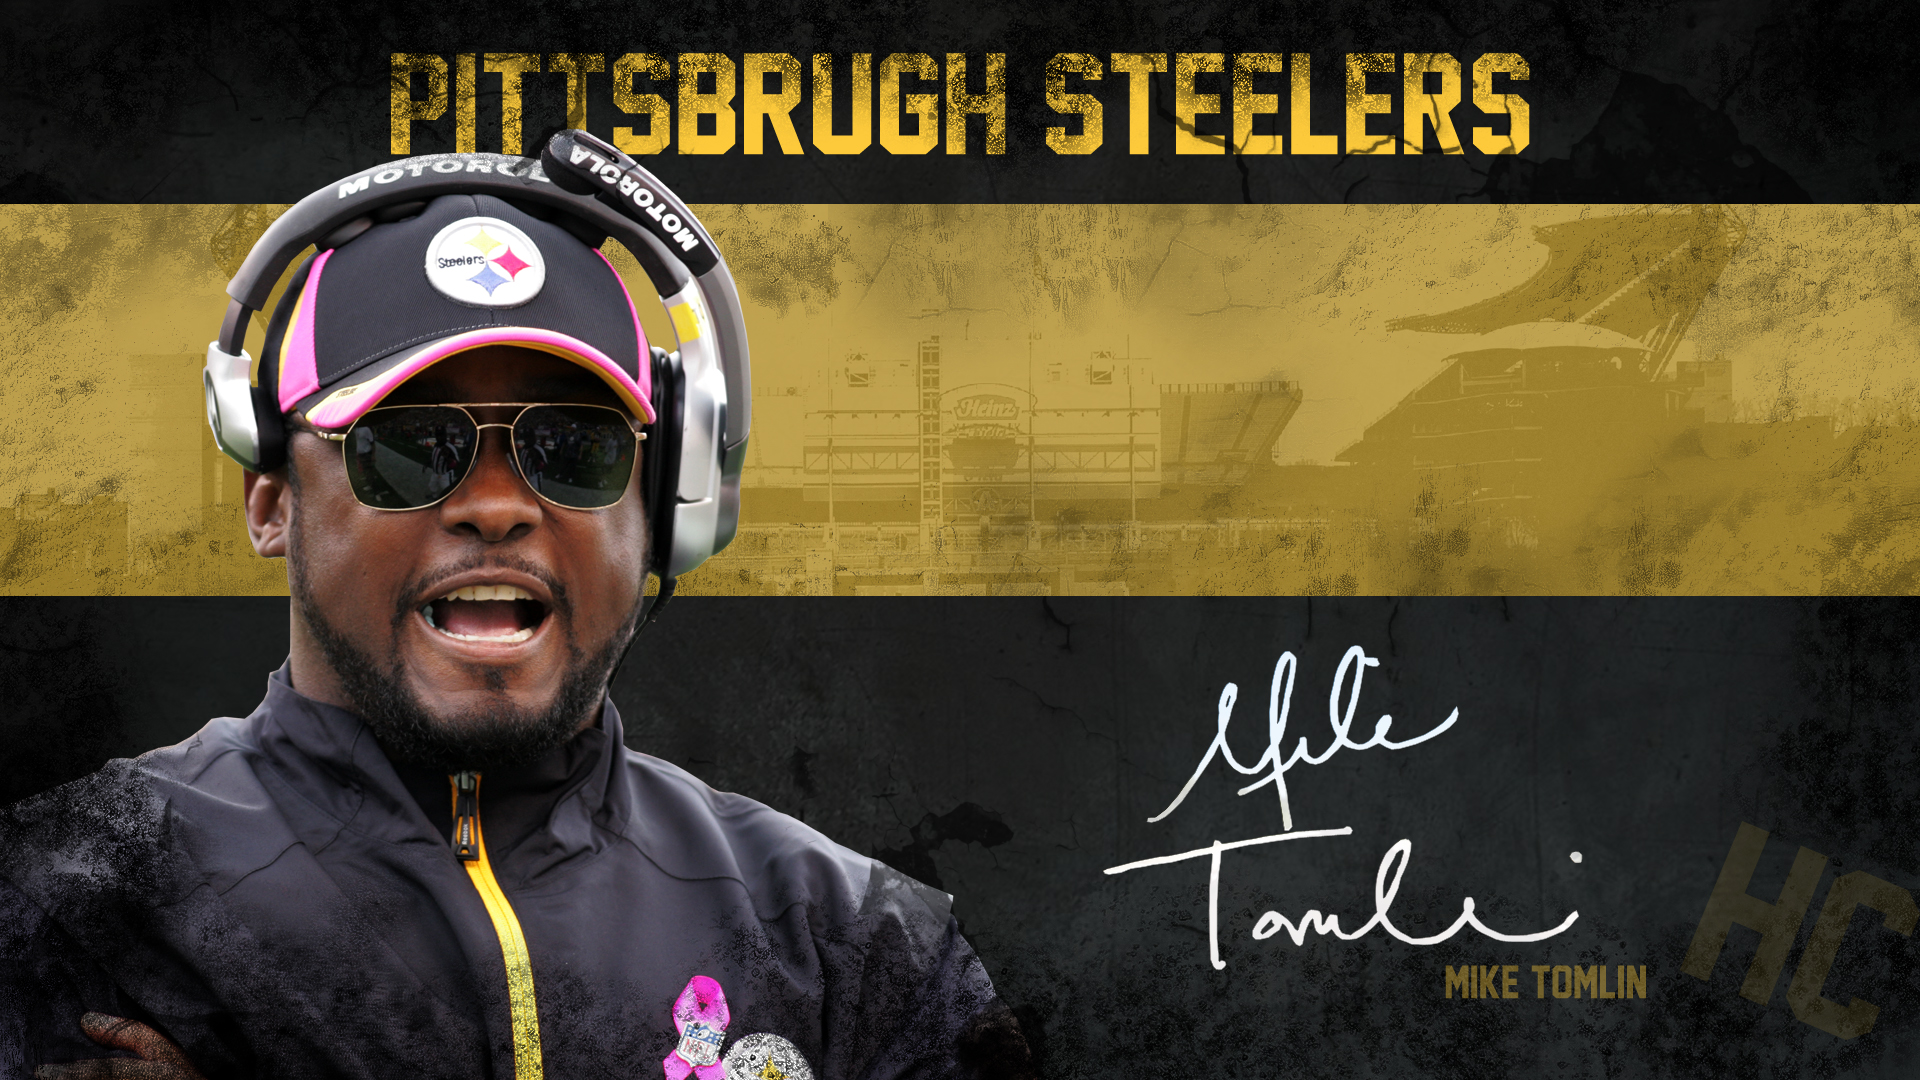 Steelers Wallpaper For Android Image Collection